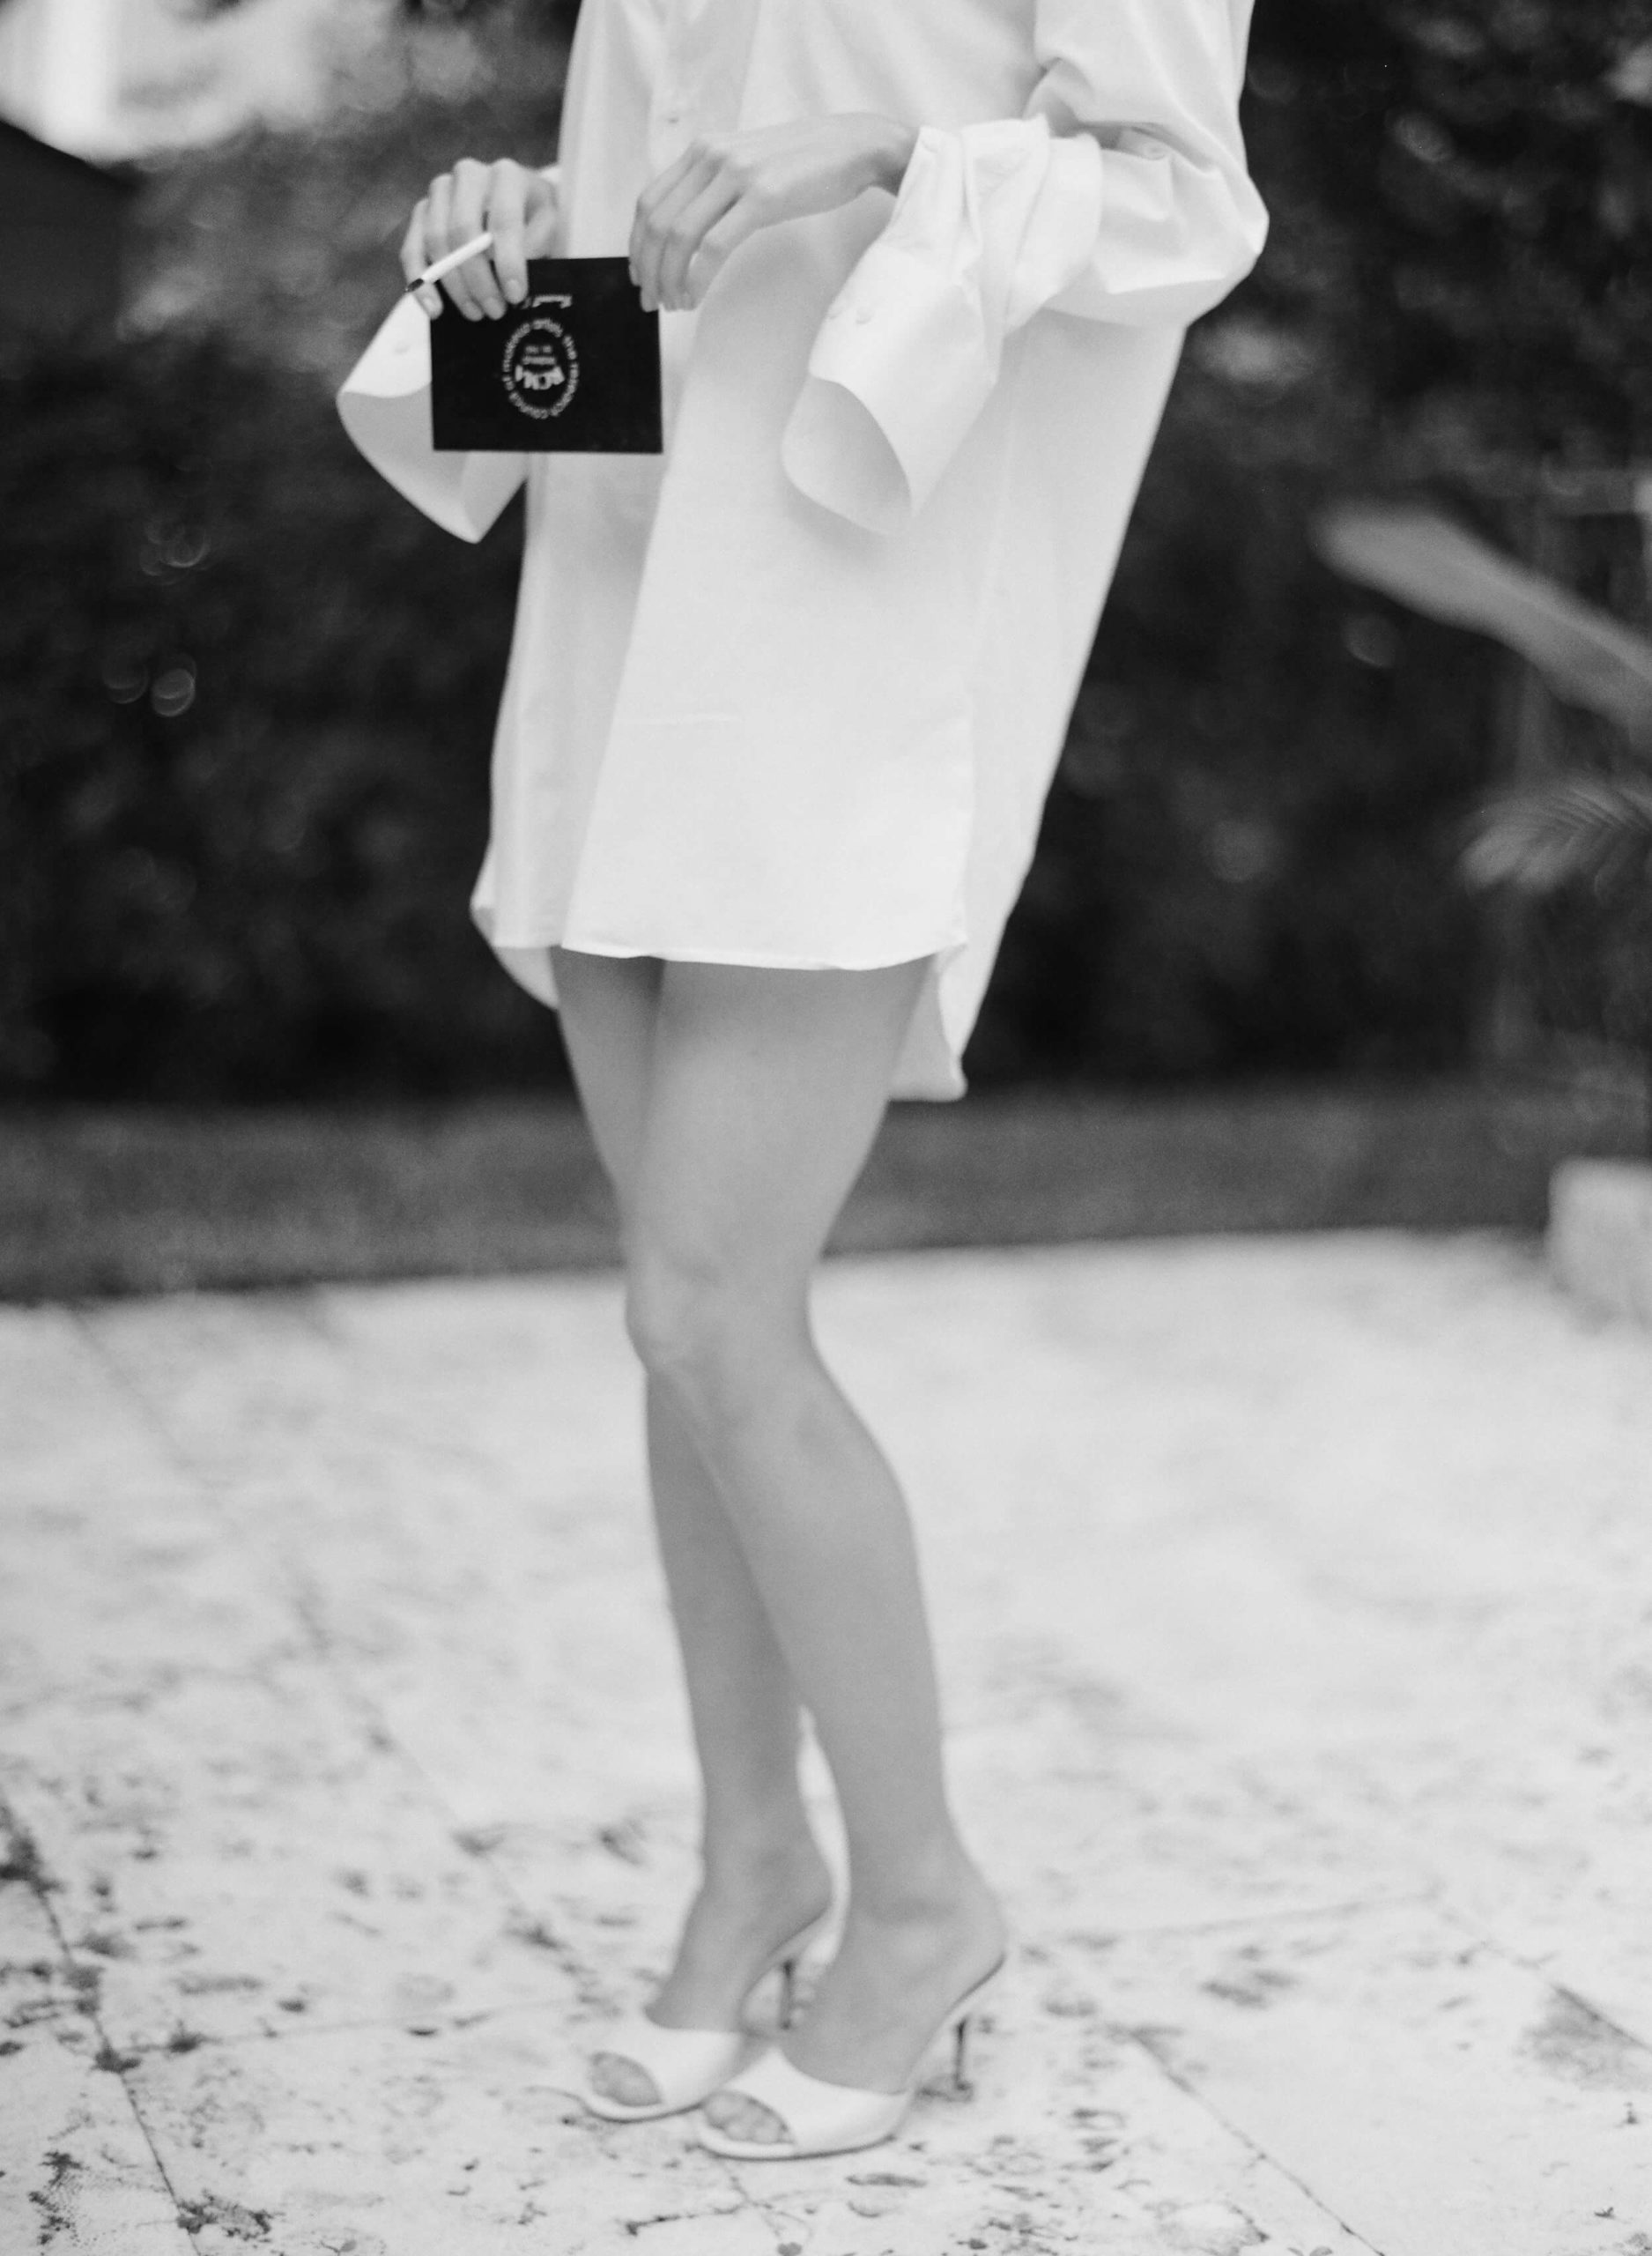 Artistic fashion photo; bride wearing men's oversized shirt with heels